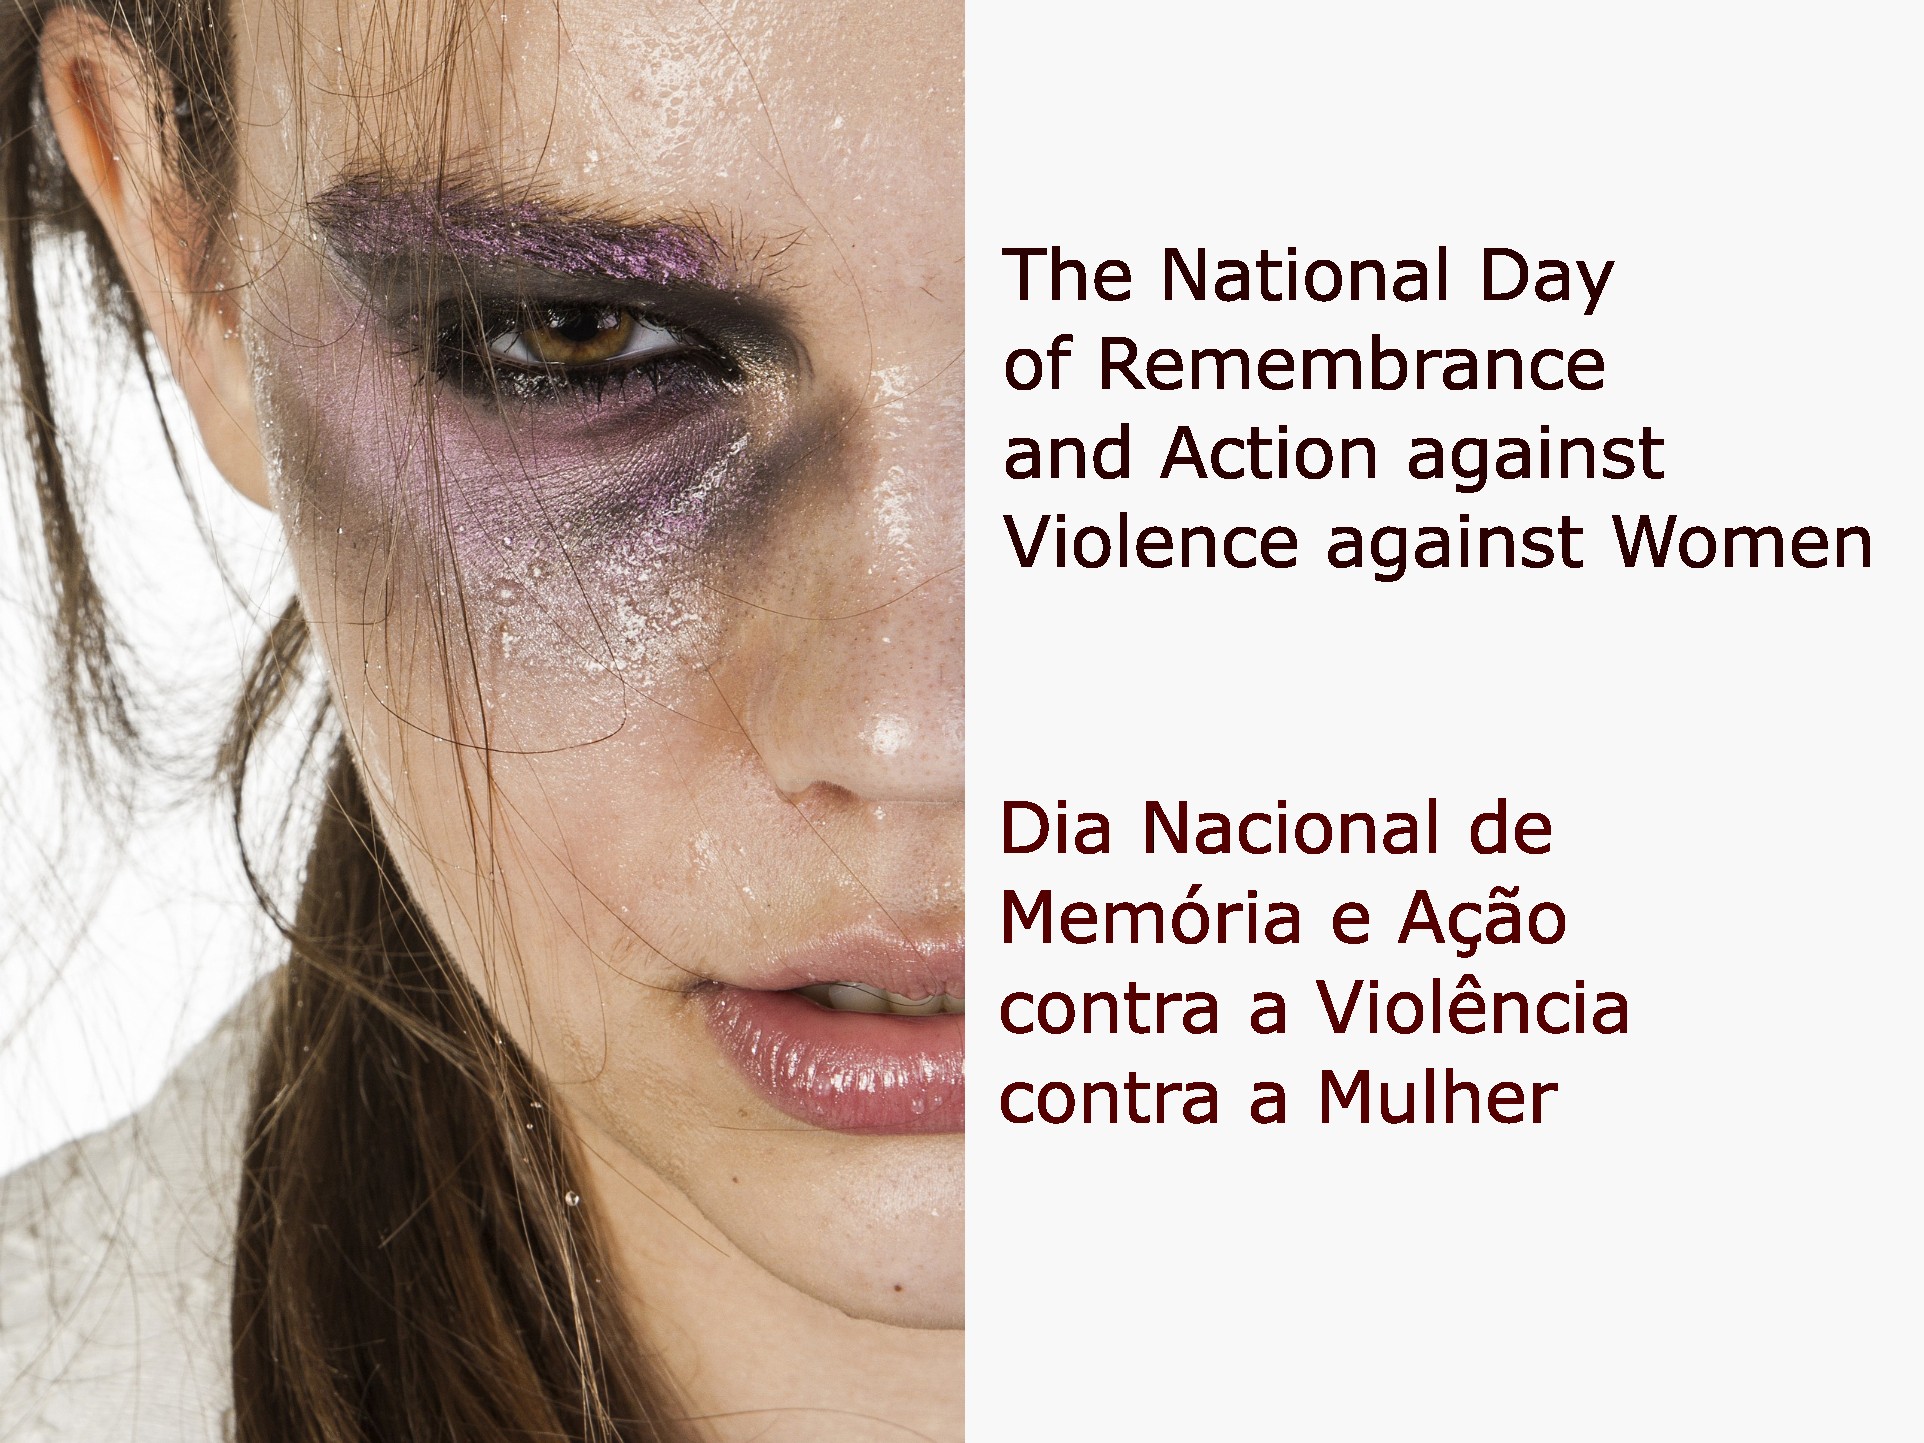 The National Day of Remembrance and Action against Violence against Women